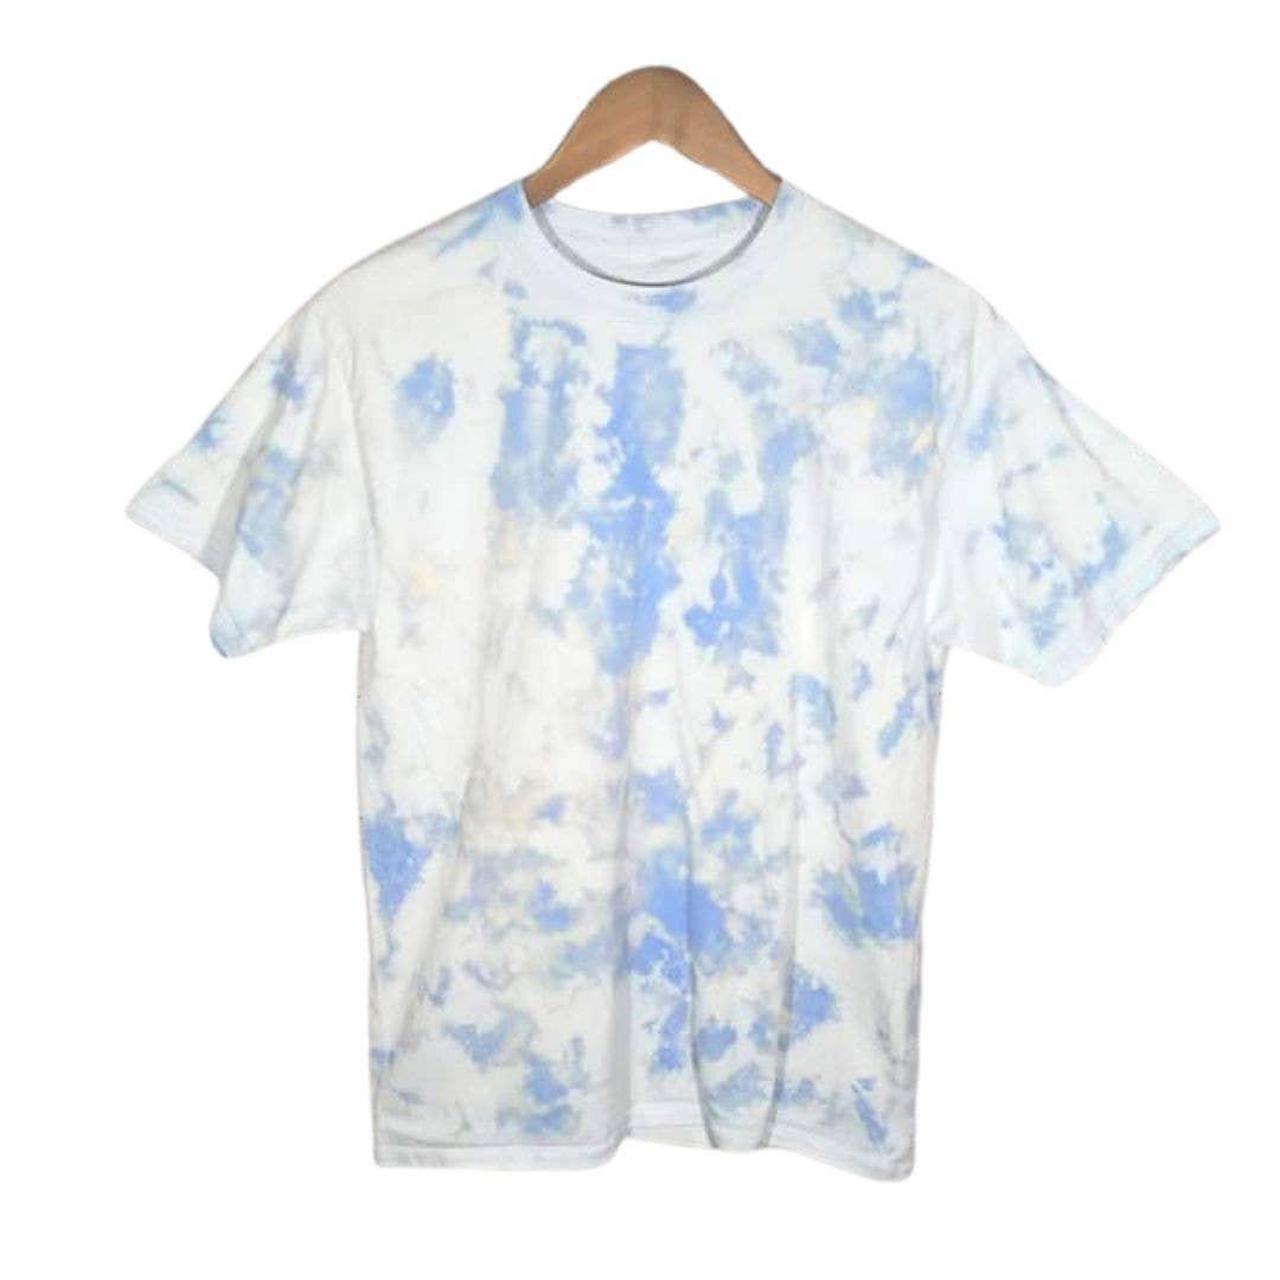 Our Legacy Men's Blue and White T-shirt